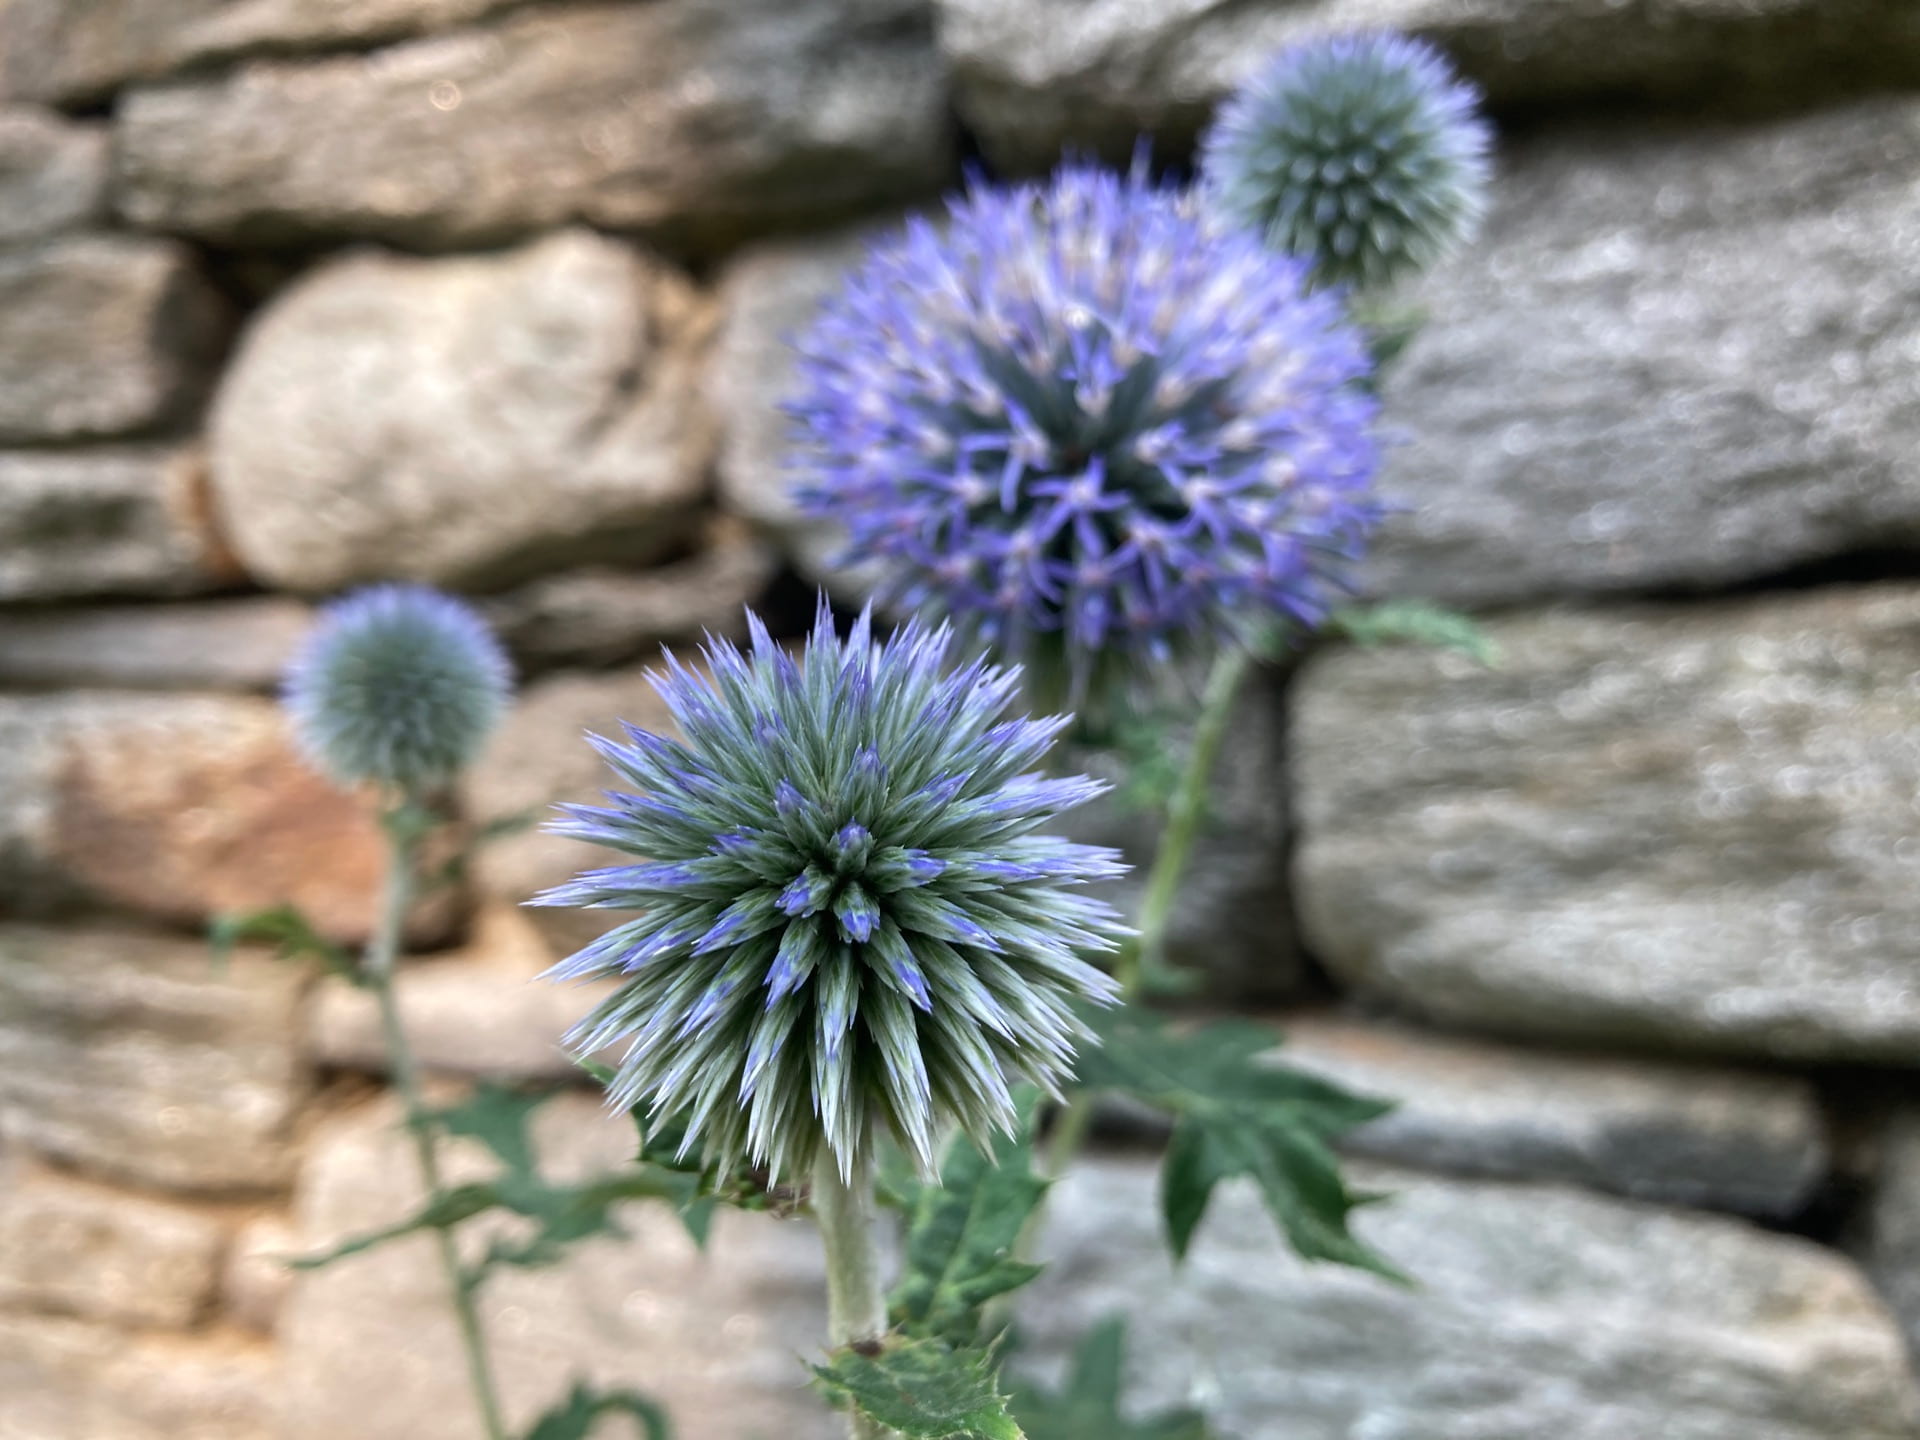 The geometric flowers of the glob thistle. Echinops cv. add an architectural element to the Rock Garden.